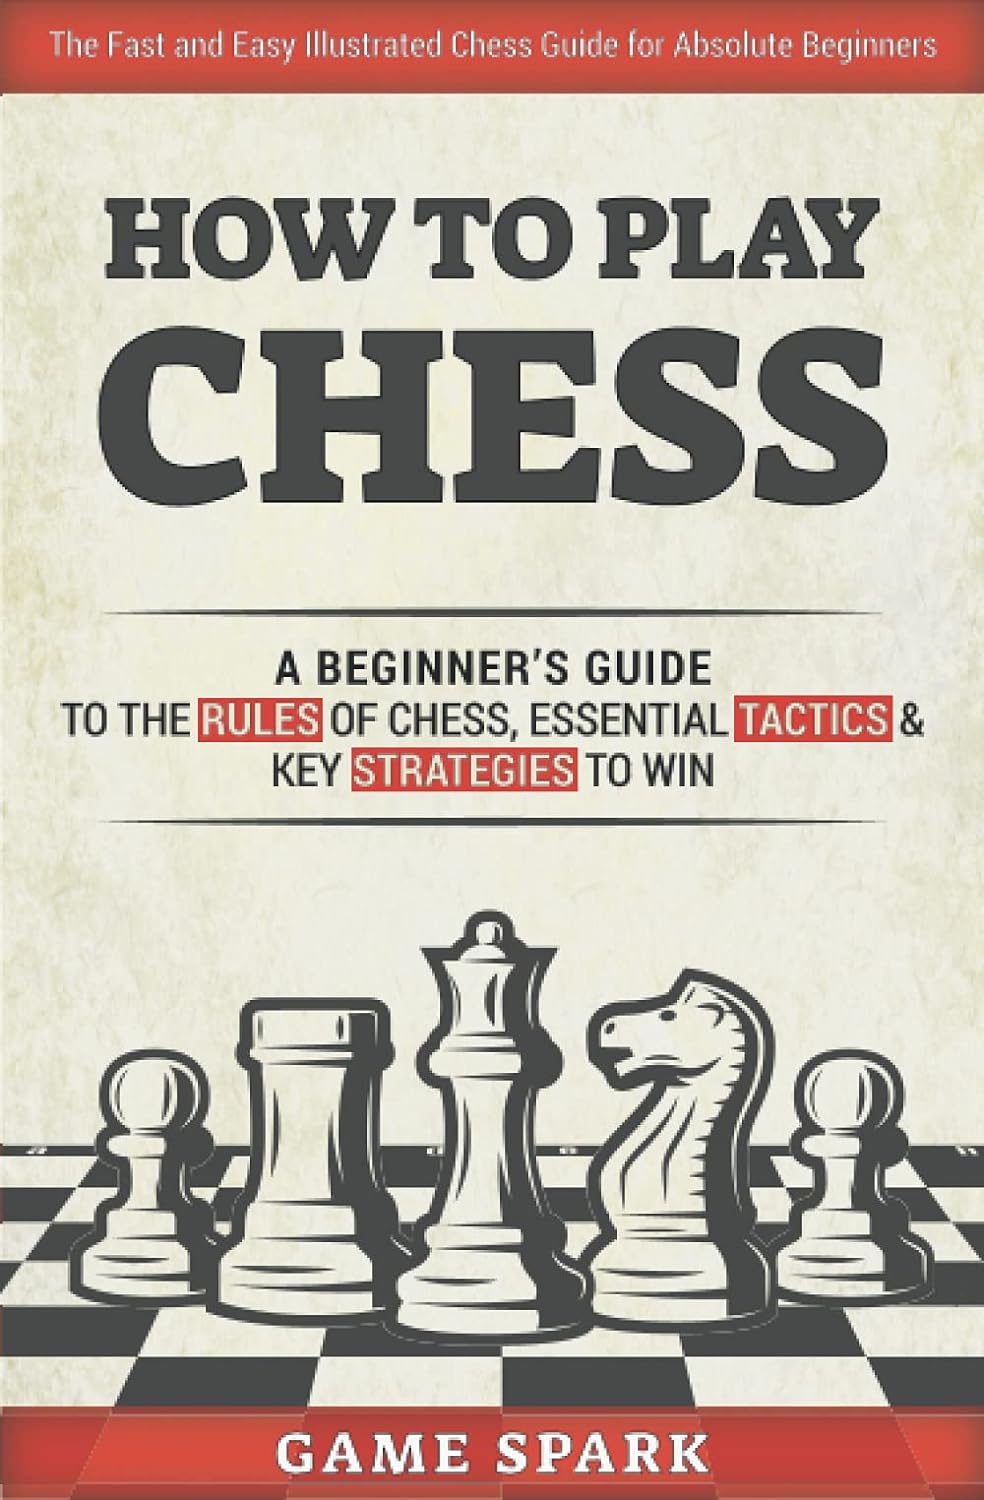 How to Play Chess: A Beginner’s Guide to the Rules of Chess